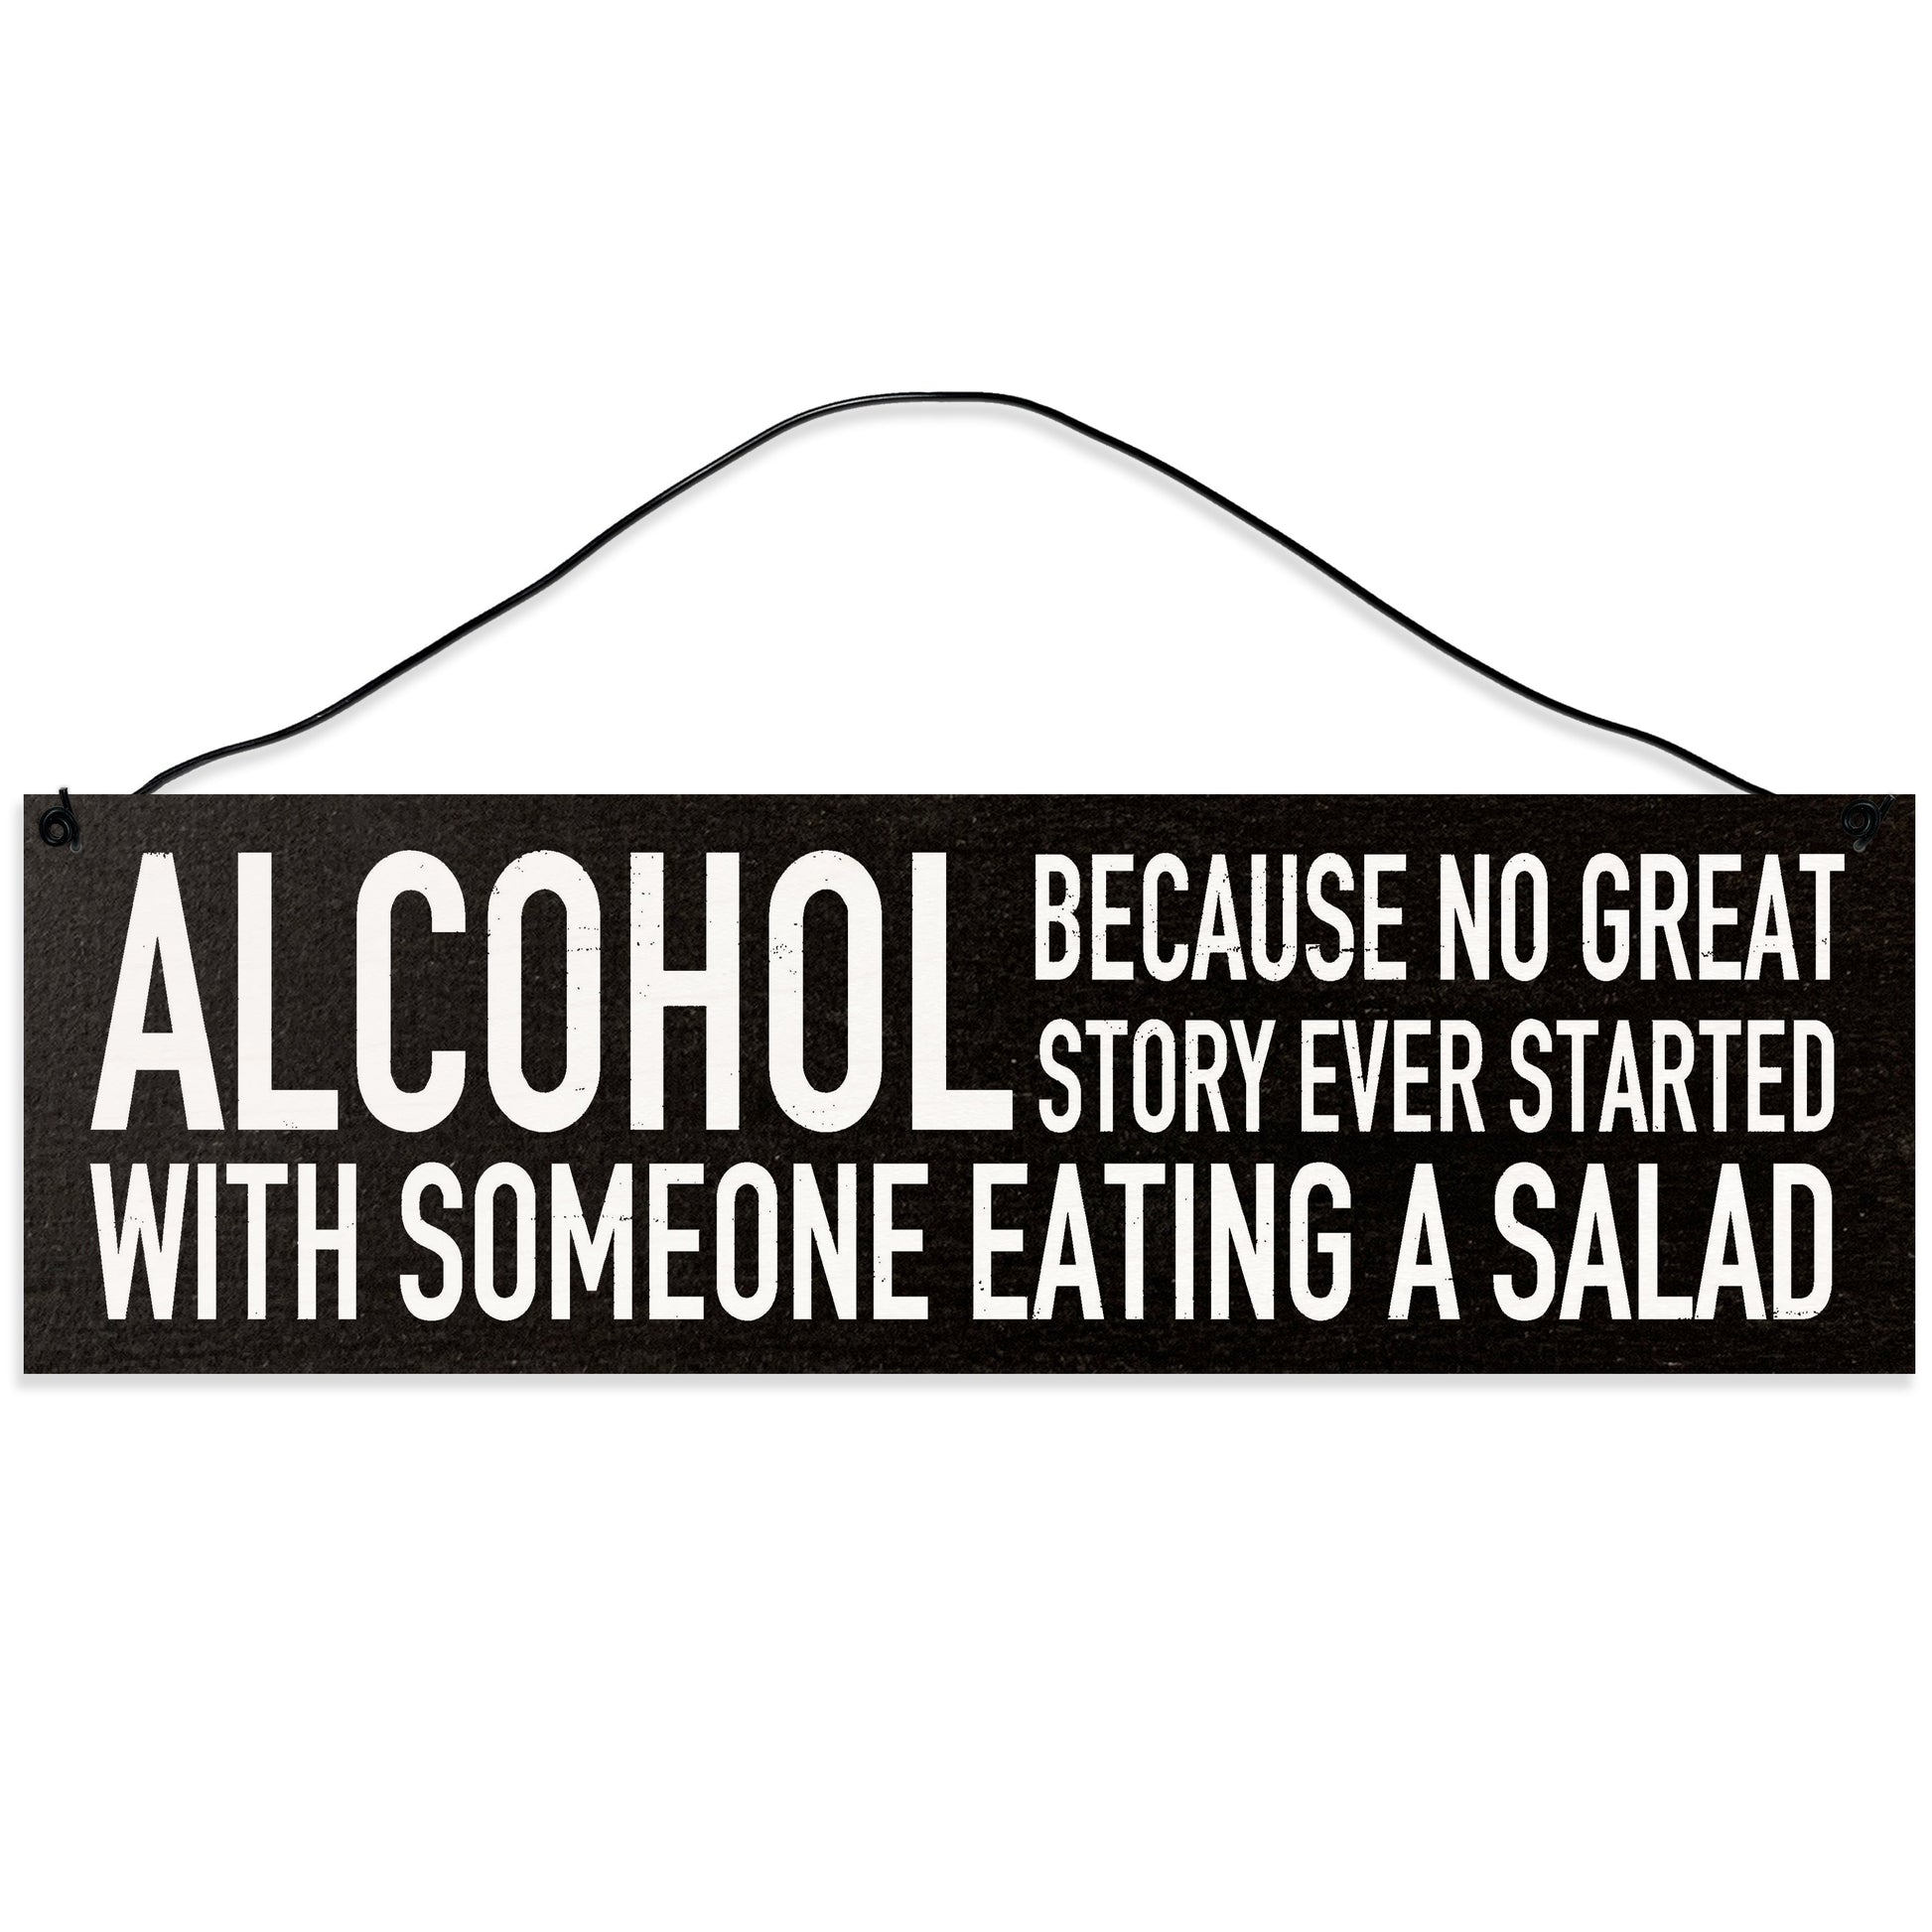 Sawyer's Mill - No Great Story Ever Started with Someone Eating a Salad. Wood Sign for Home or Office. Measures 3x10 inches.